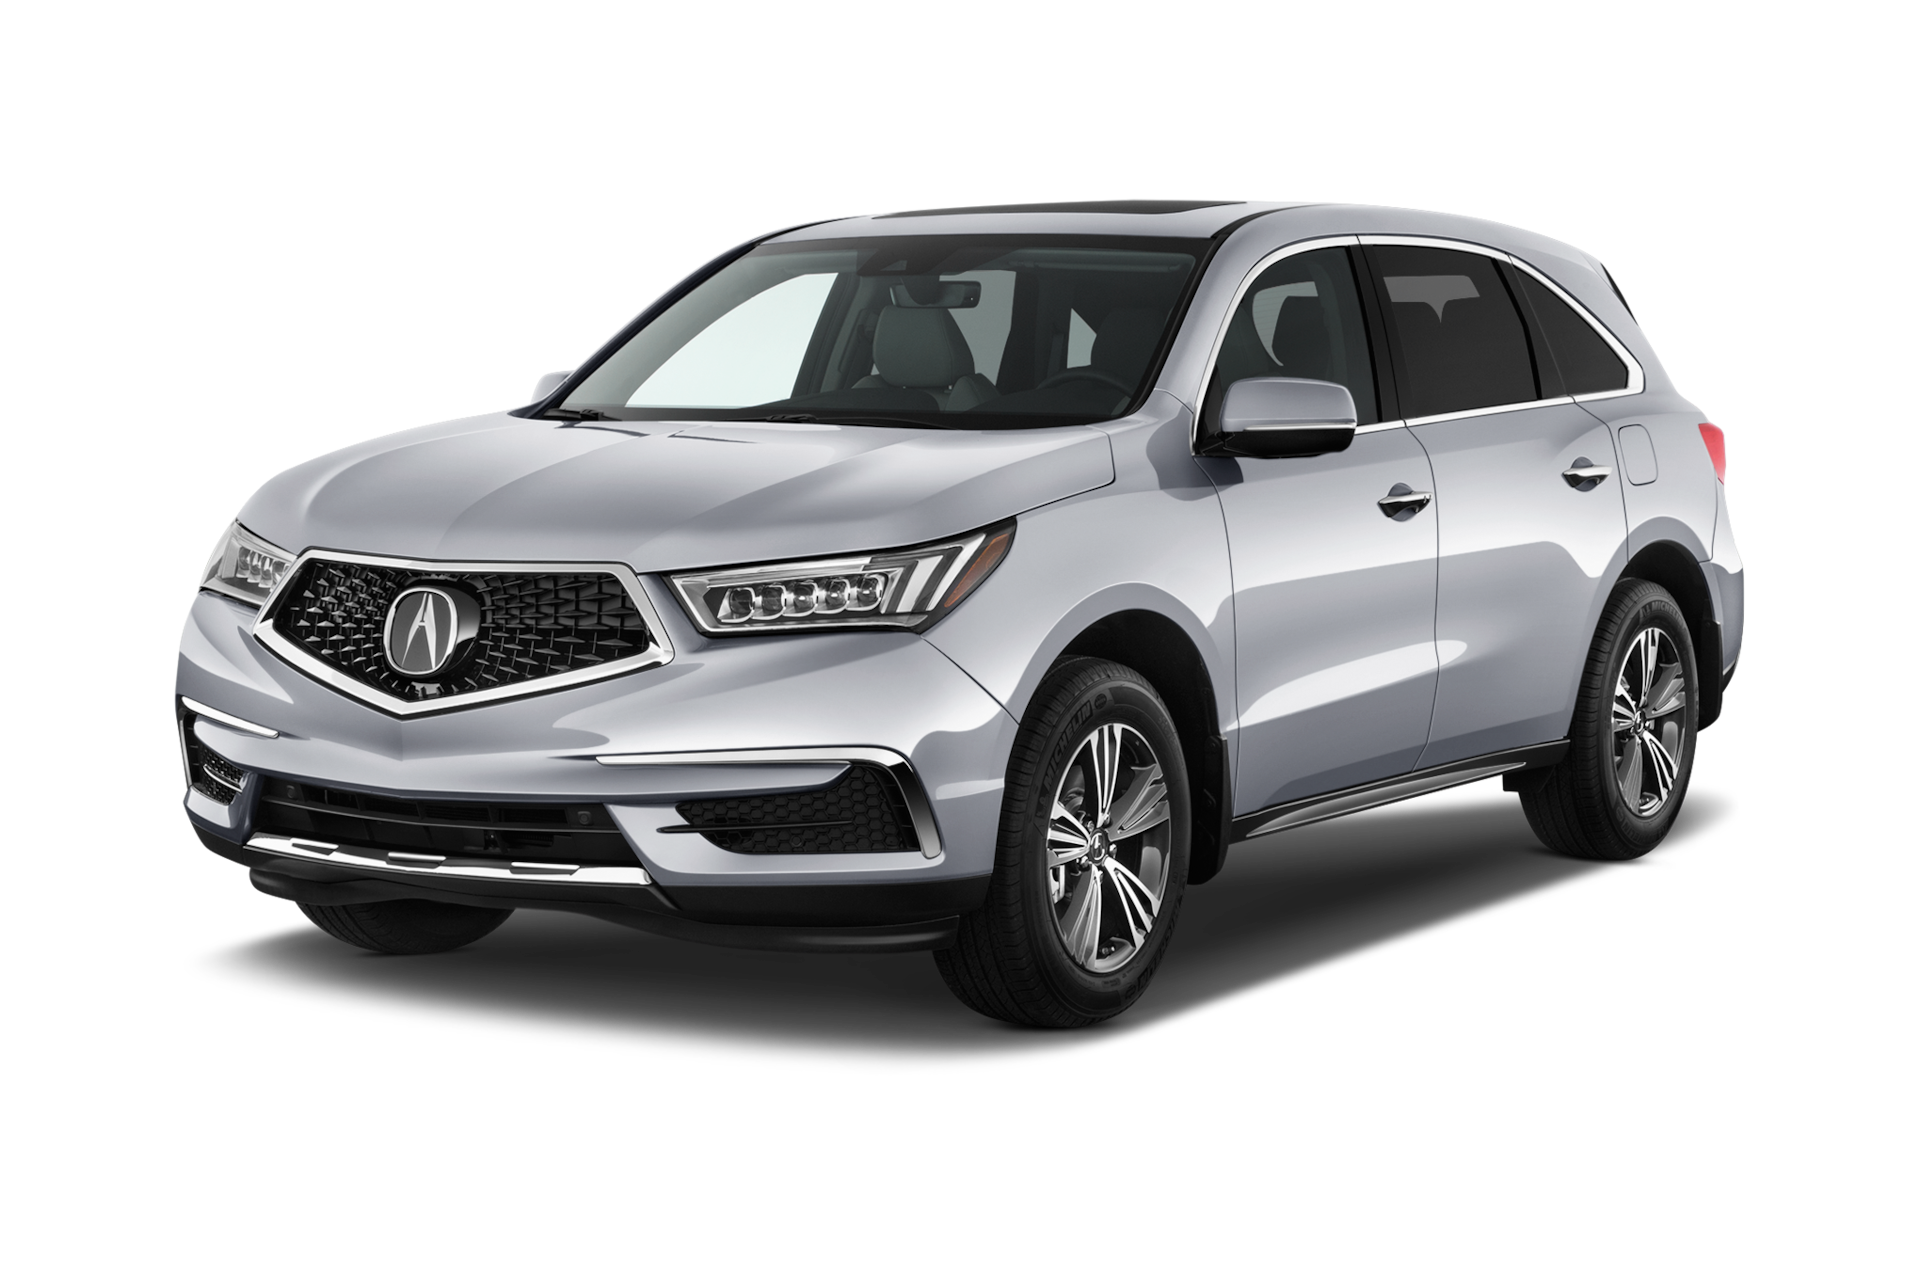 2020 Acura MDX Prices, Reviews, and Photos - MotorTrend